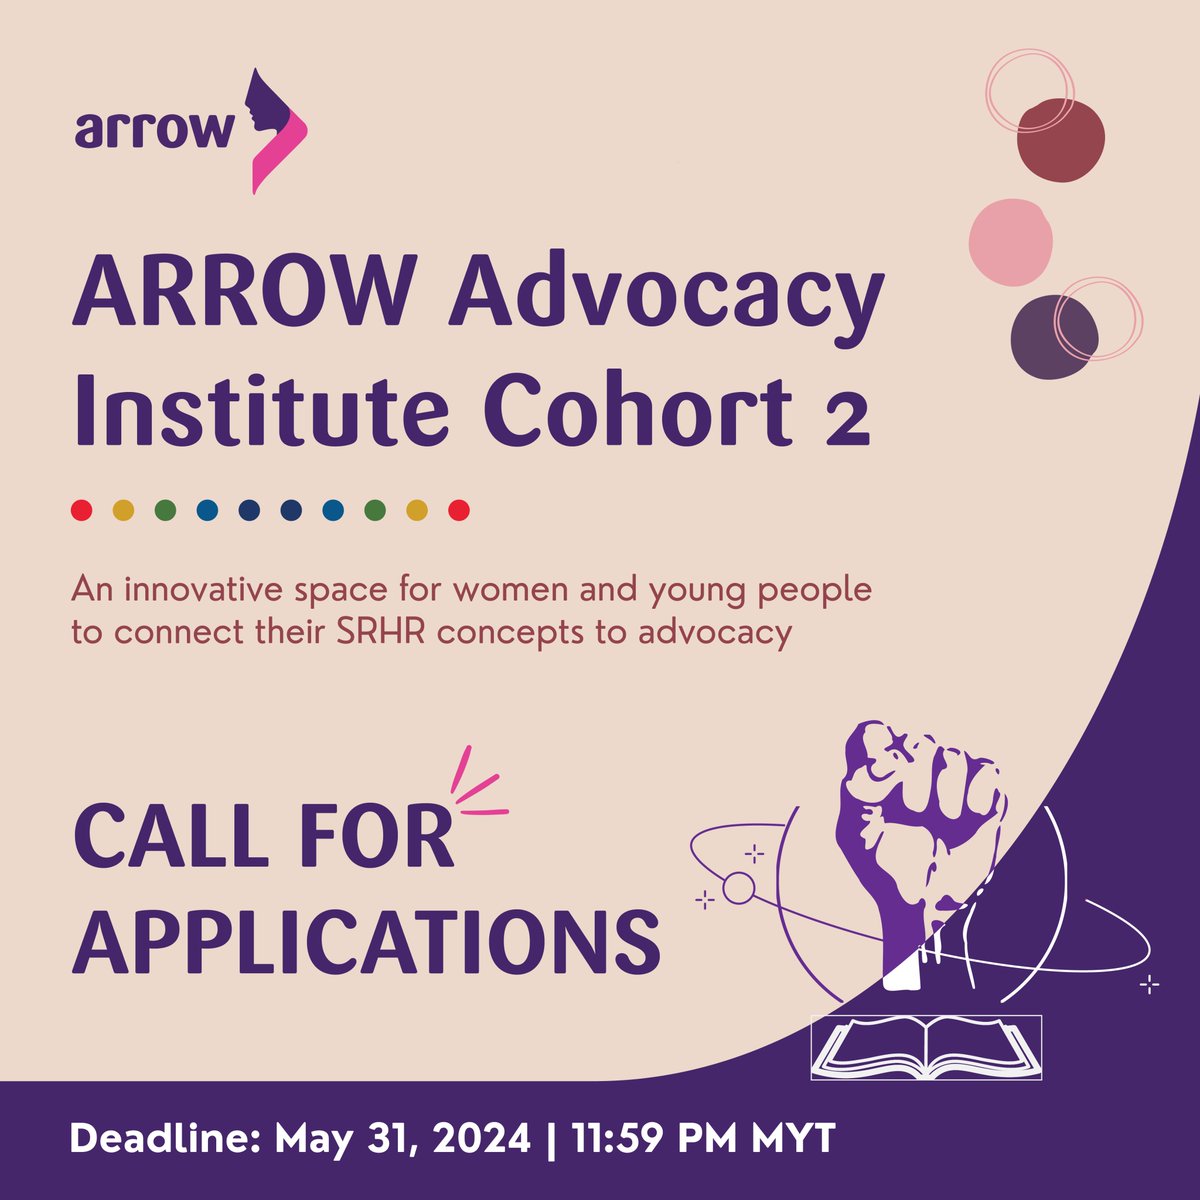 📢APPLY NOW!!📢 Learn, design and implement your advocacy initiatives💫 Introducing: ARROW Advocacy Institute Cohort 2 Apply here 👉 forms.gle/F28E8jX5dk69cn… Deadline👉May 31, 2024, 23:59 PM, Malaysian Standard Time For more details 👉arrow.org.my/careers/arrow-… #Opportunities